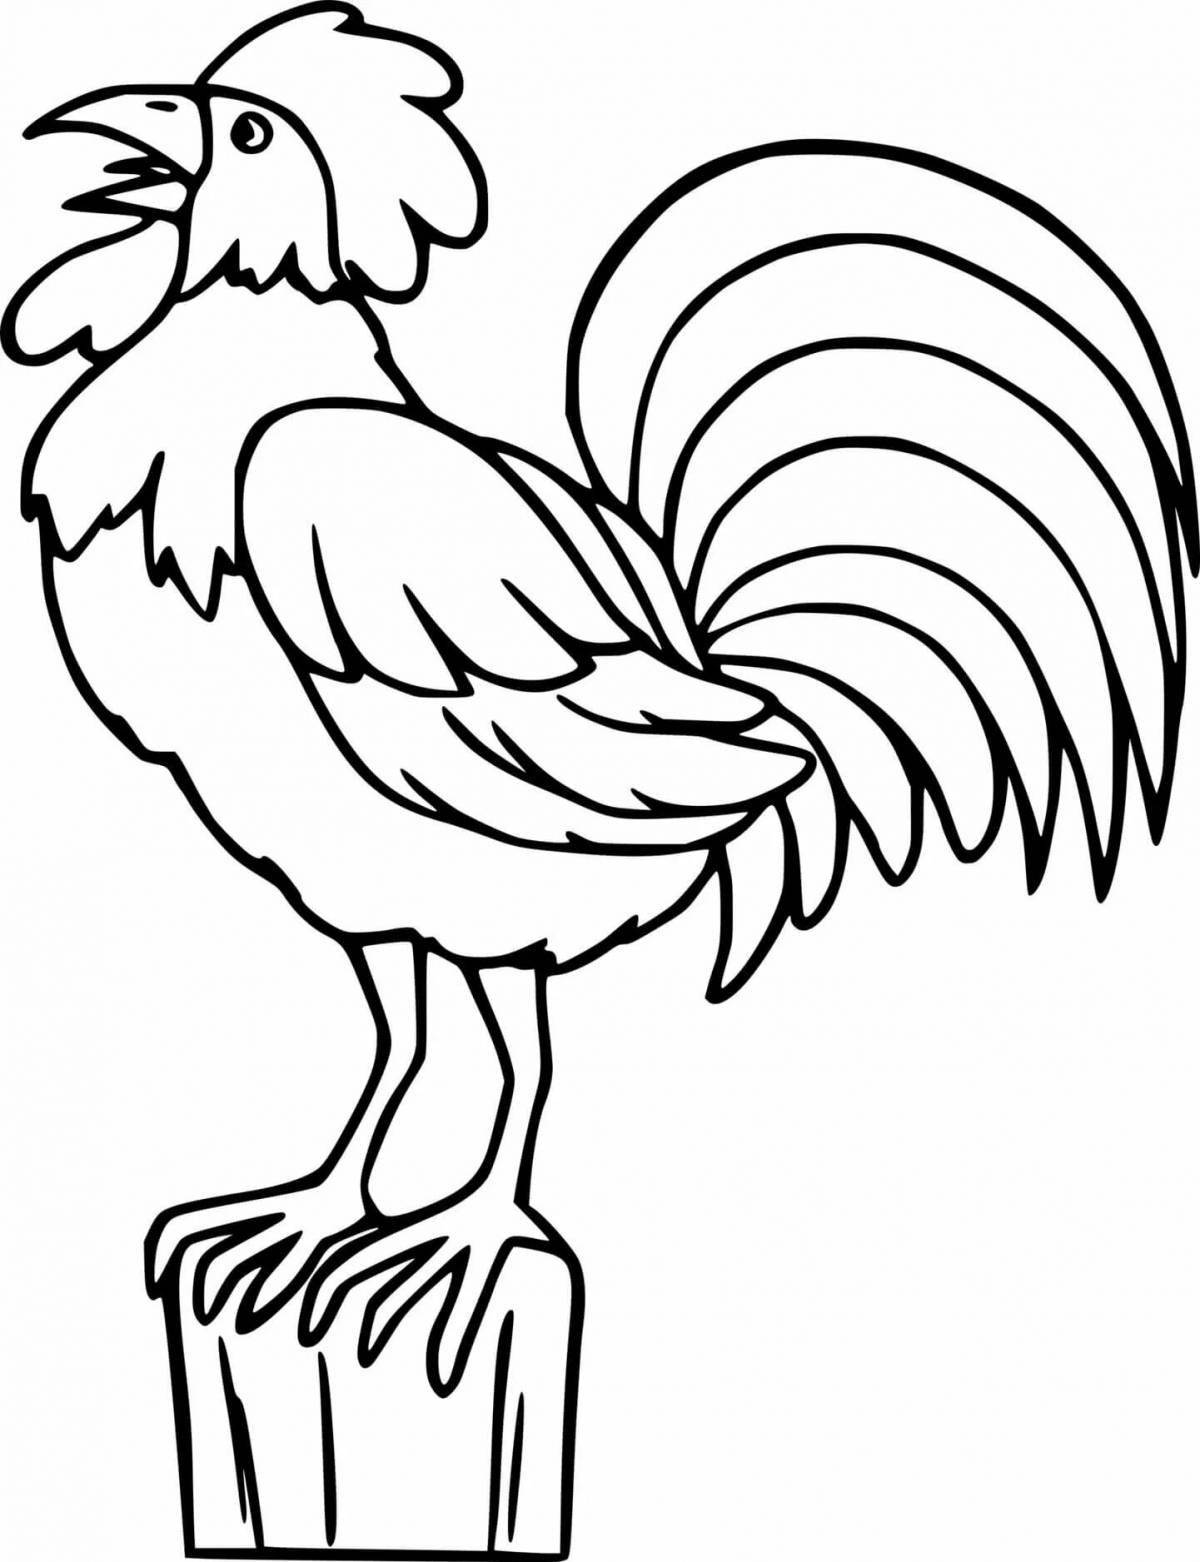 Rampant rooster coloring pages for kids